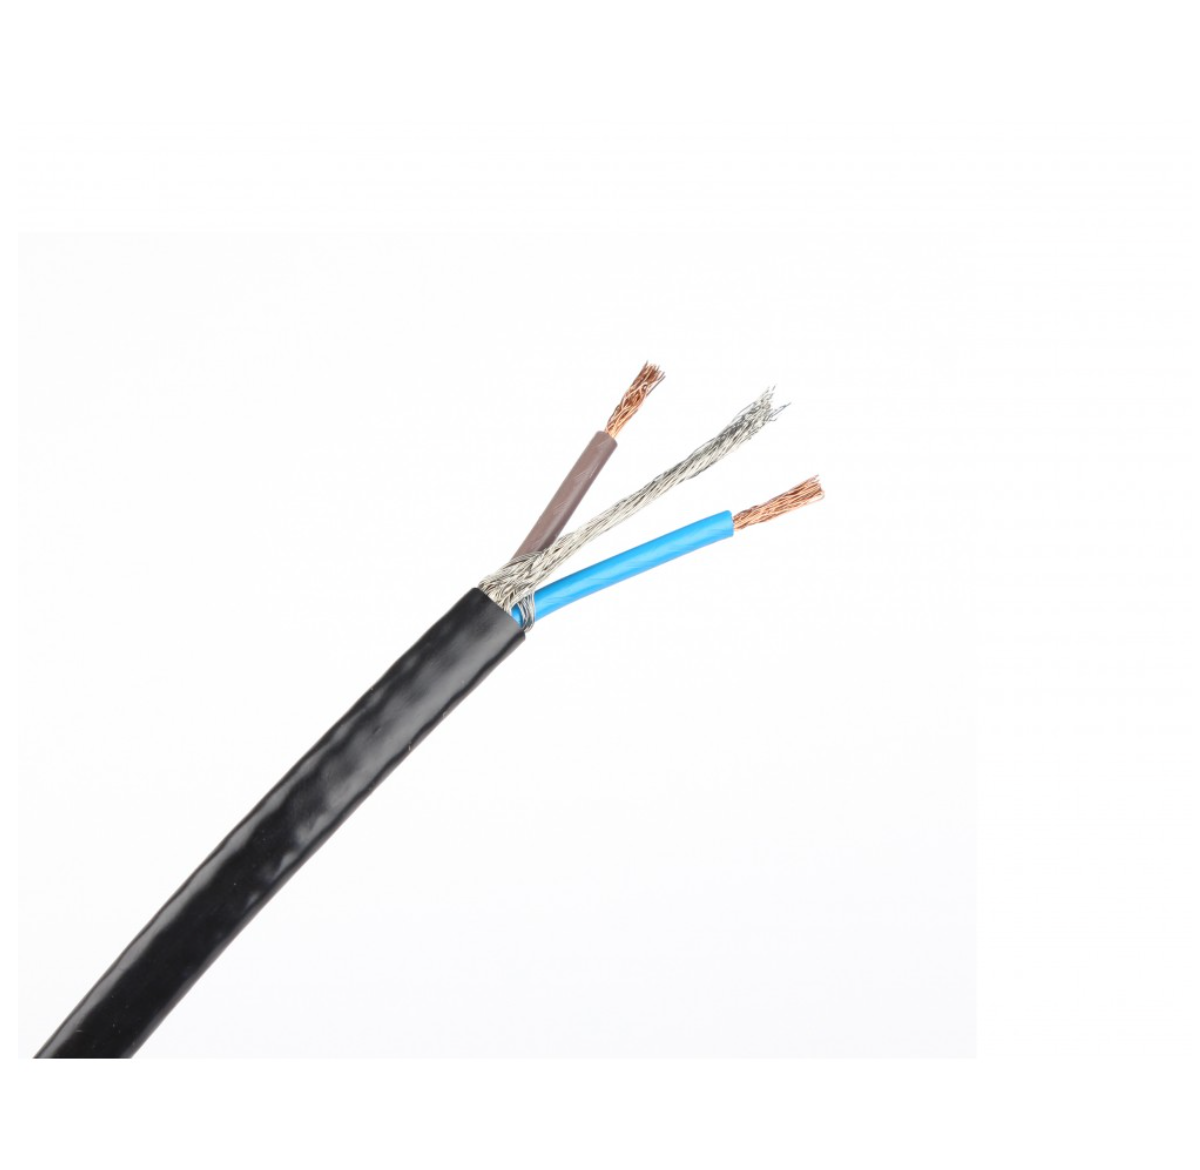 Heating cable - 160m